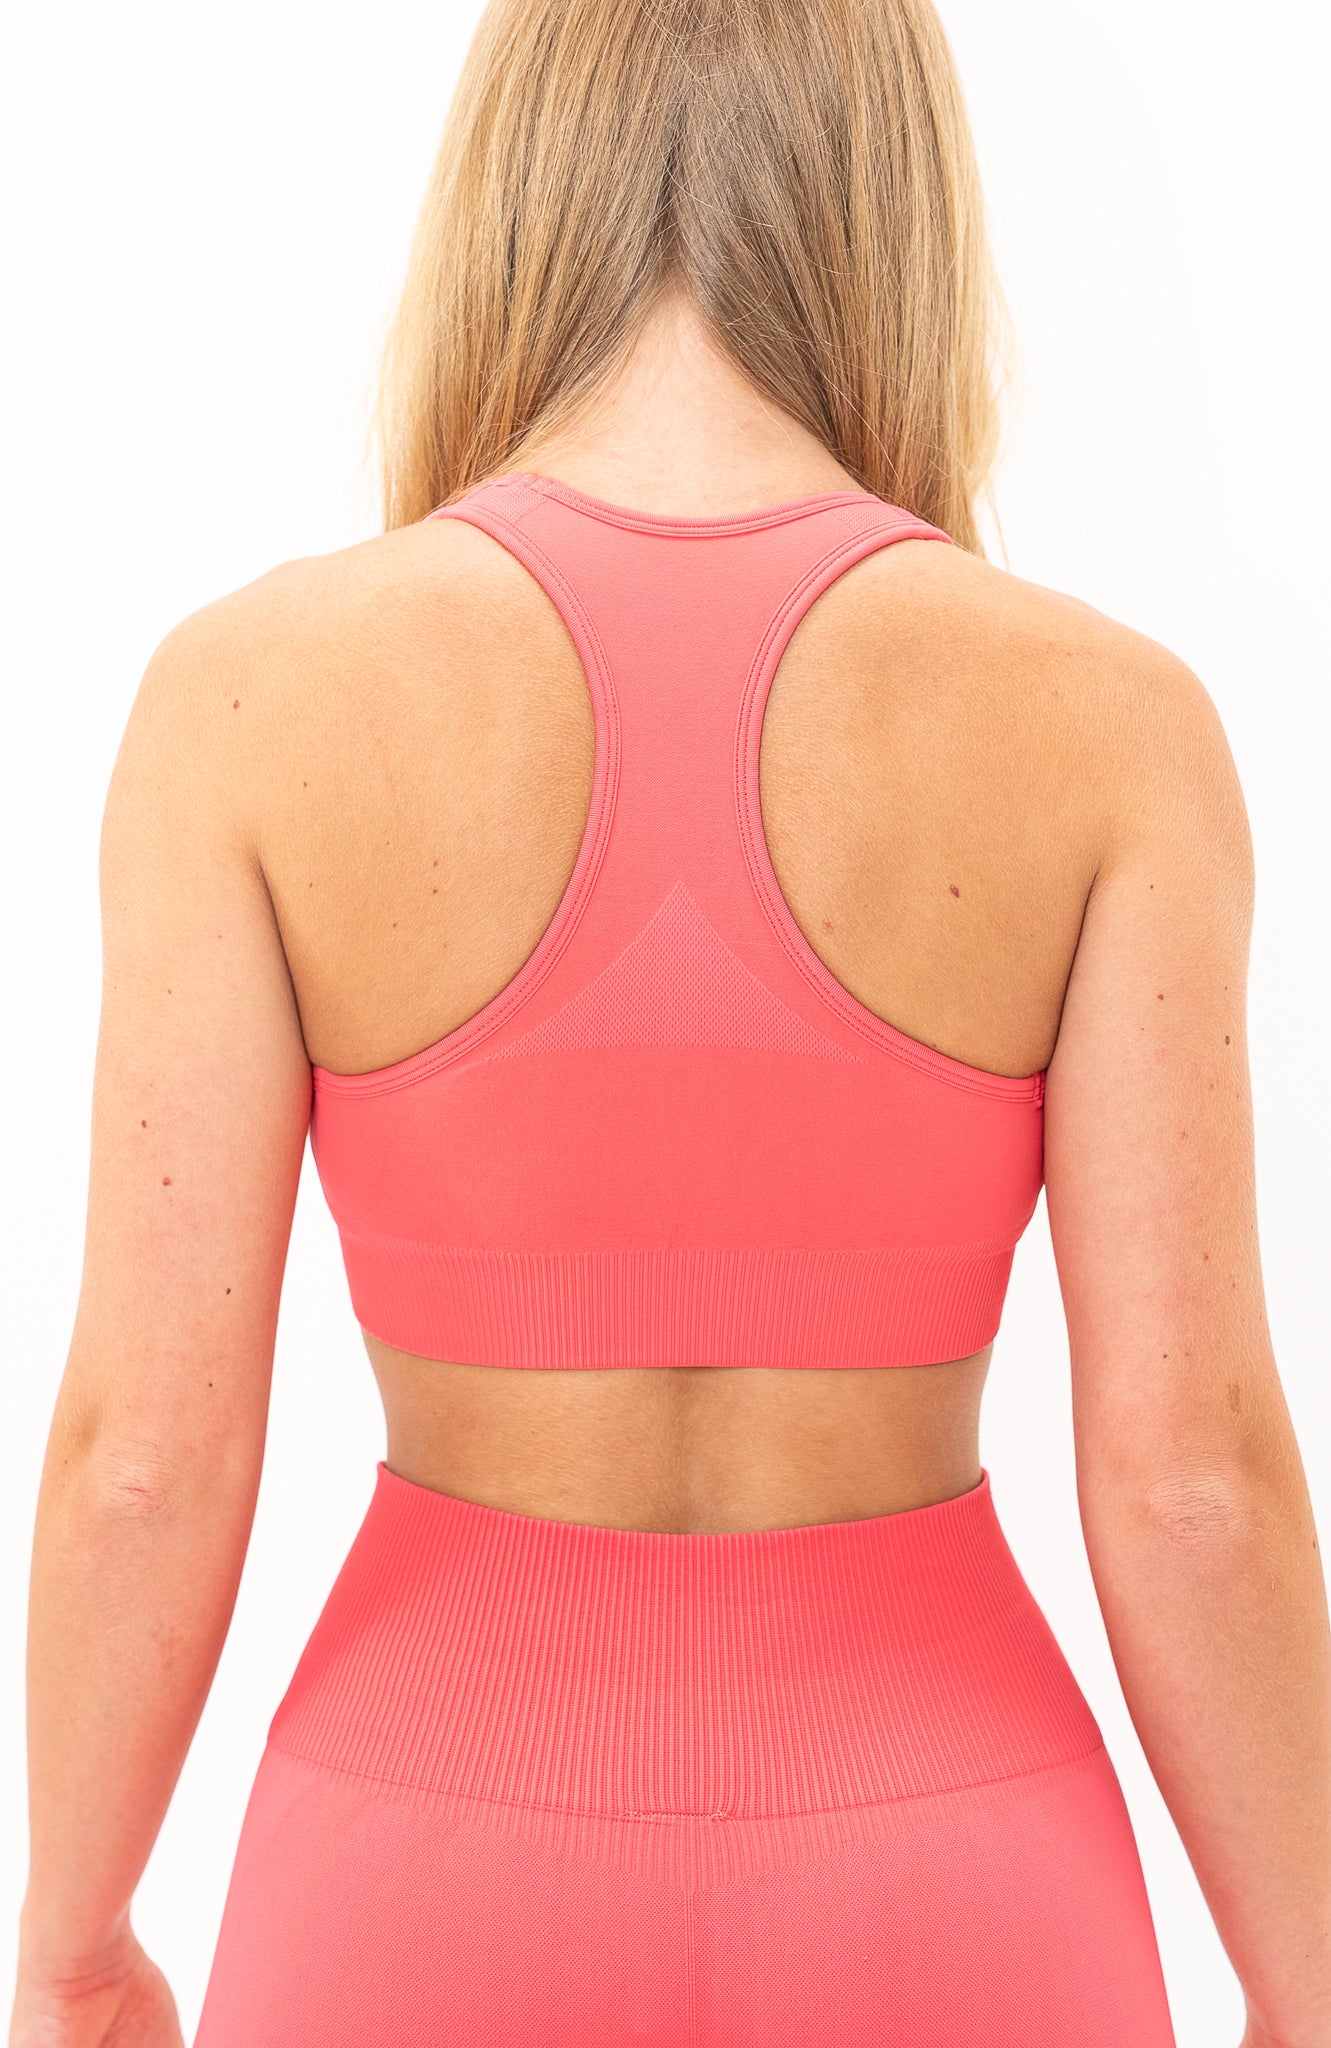 V3 Apparel Women's seamless Limitless training sports bra in coral pink with removable padded cups and strap for gym workouts training, Running, yoga, bodybuilding and bikini fitness.